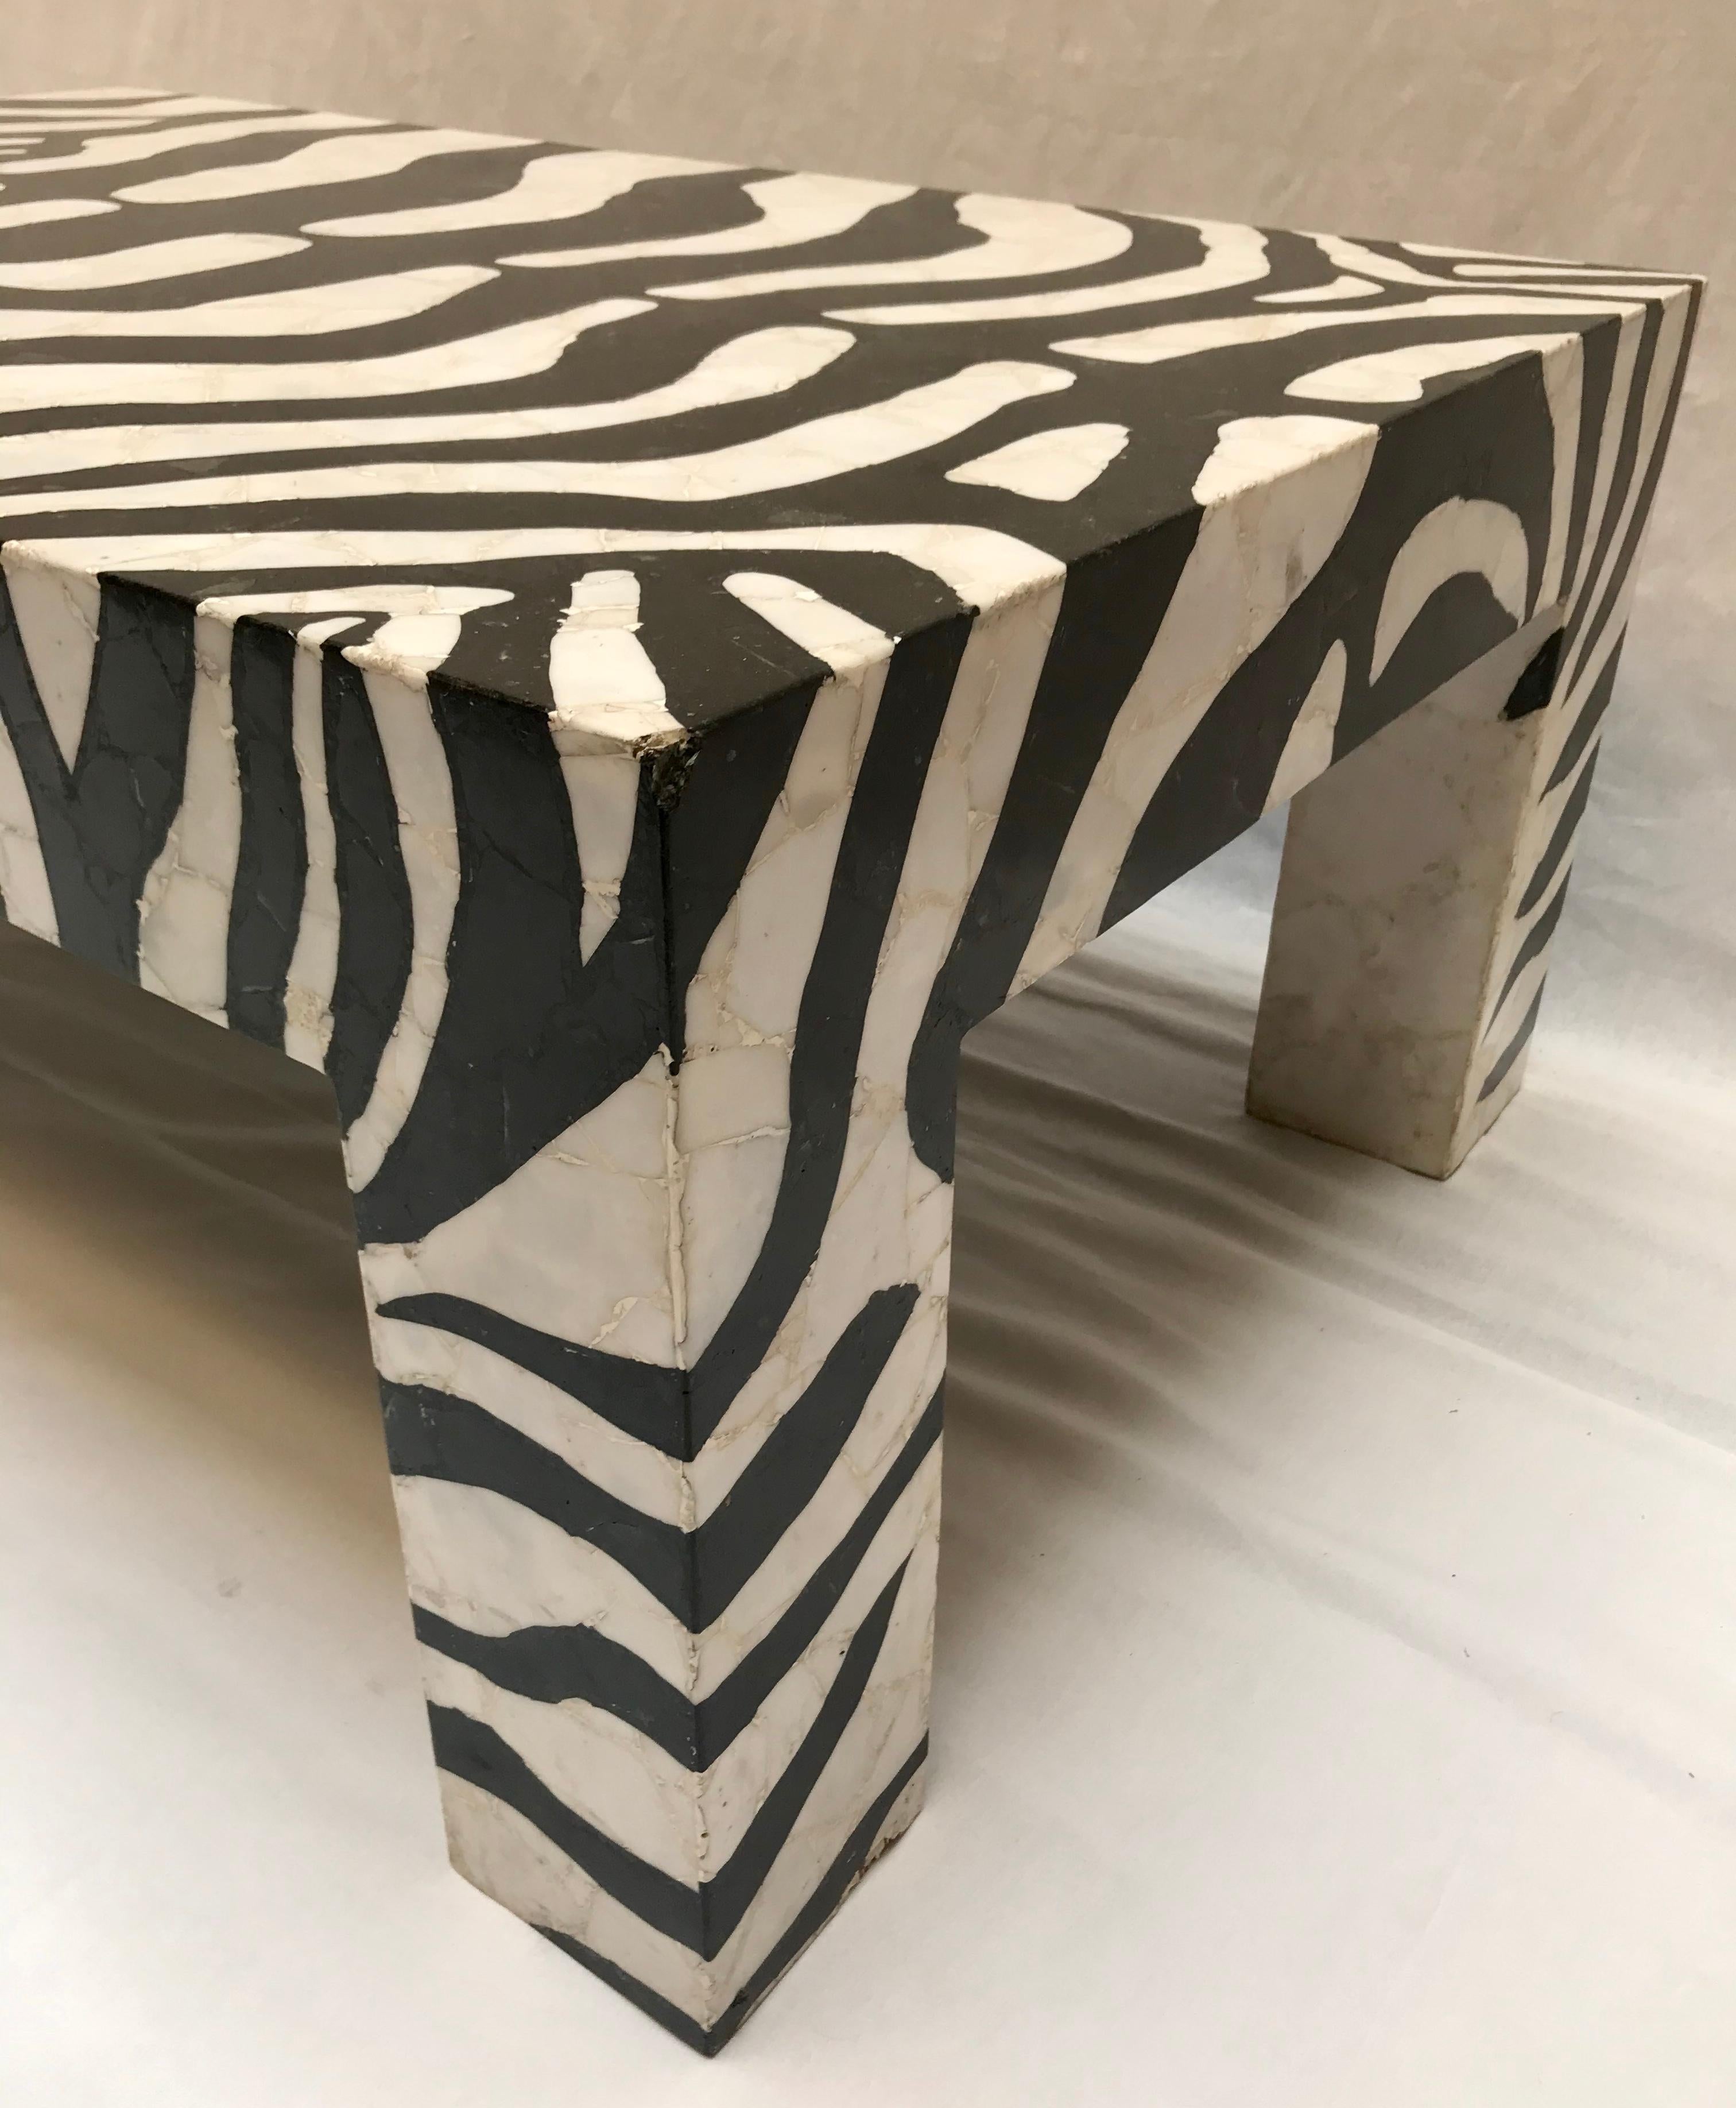 20th Century Mid-Century Modern Coffee Table Marble Mozaic, Zebra Pattern For Sale